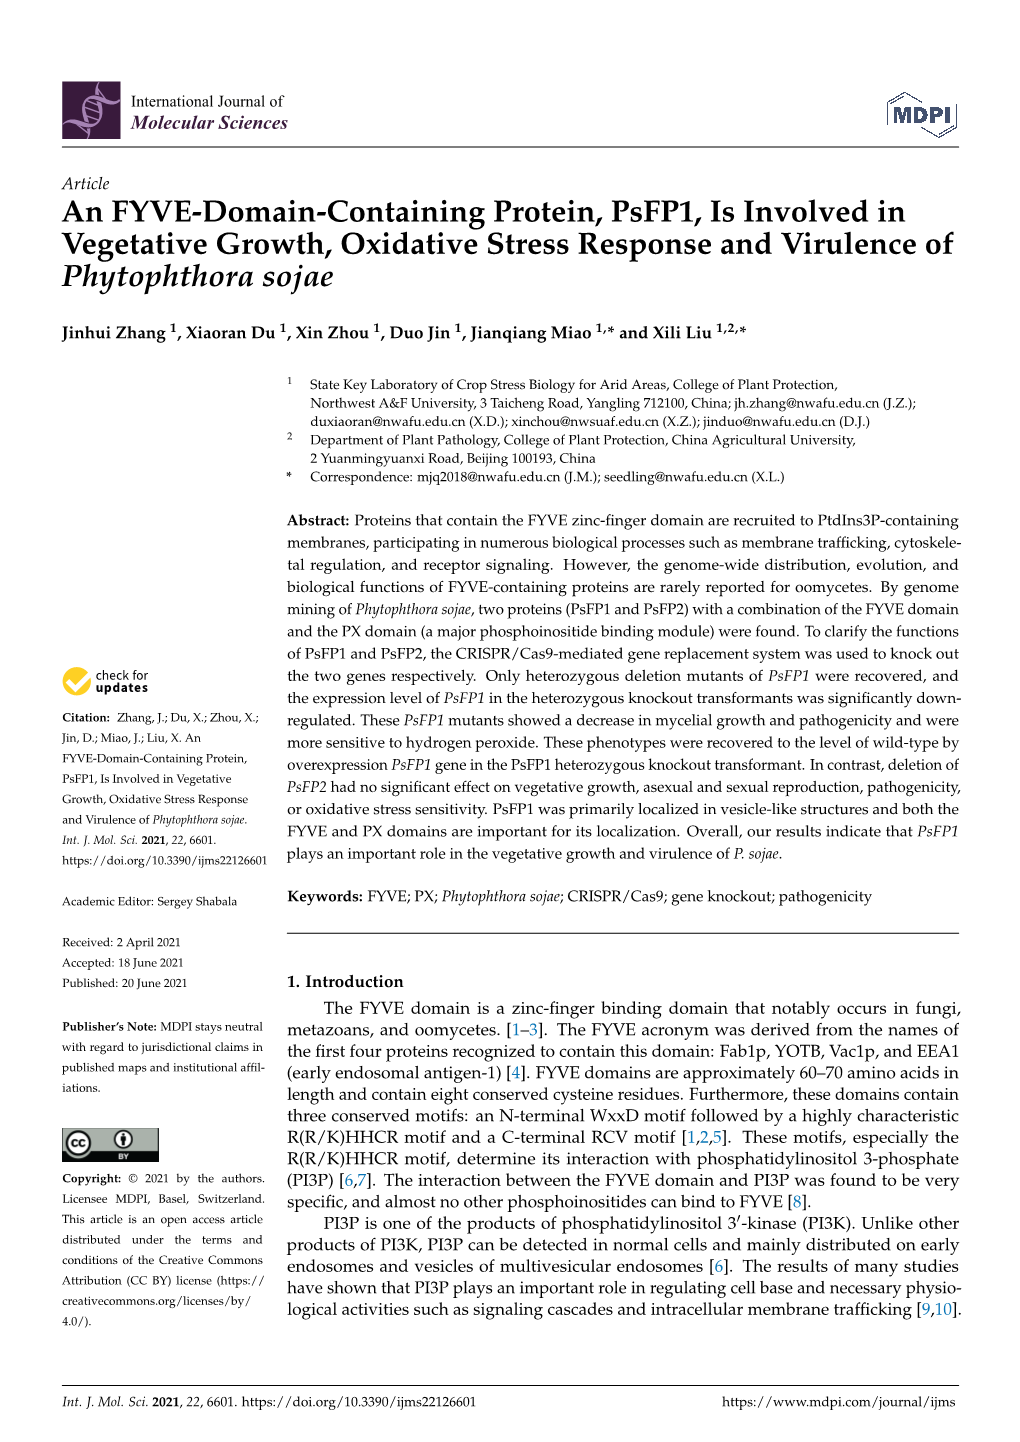 An FYVE-Domain-Containing Protein, Psfp1, Is Involved in Vegetative Growth, Oxidative Stress Response and Virulence of Phytophthora Sojae